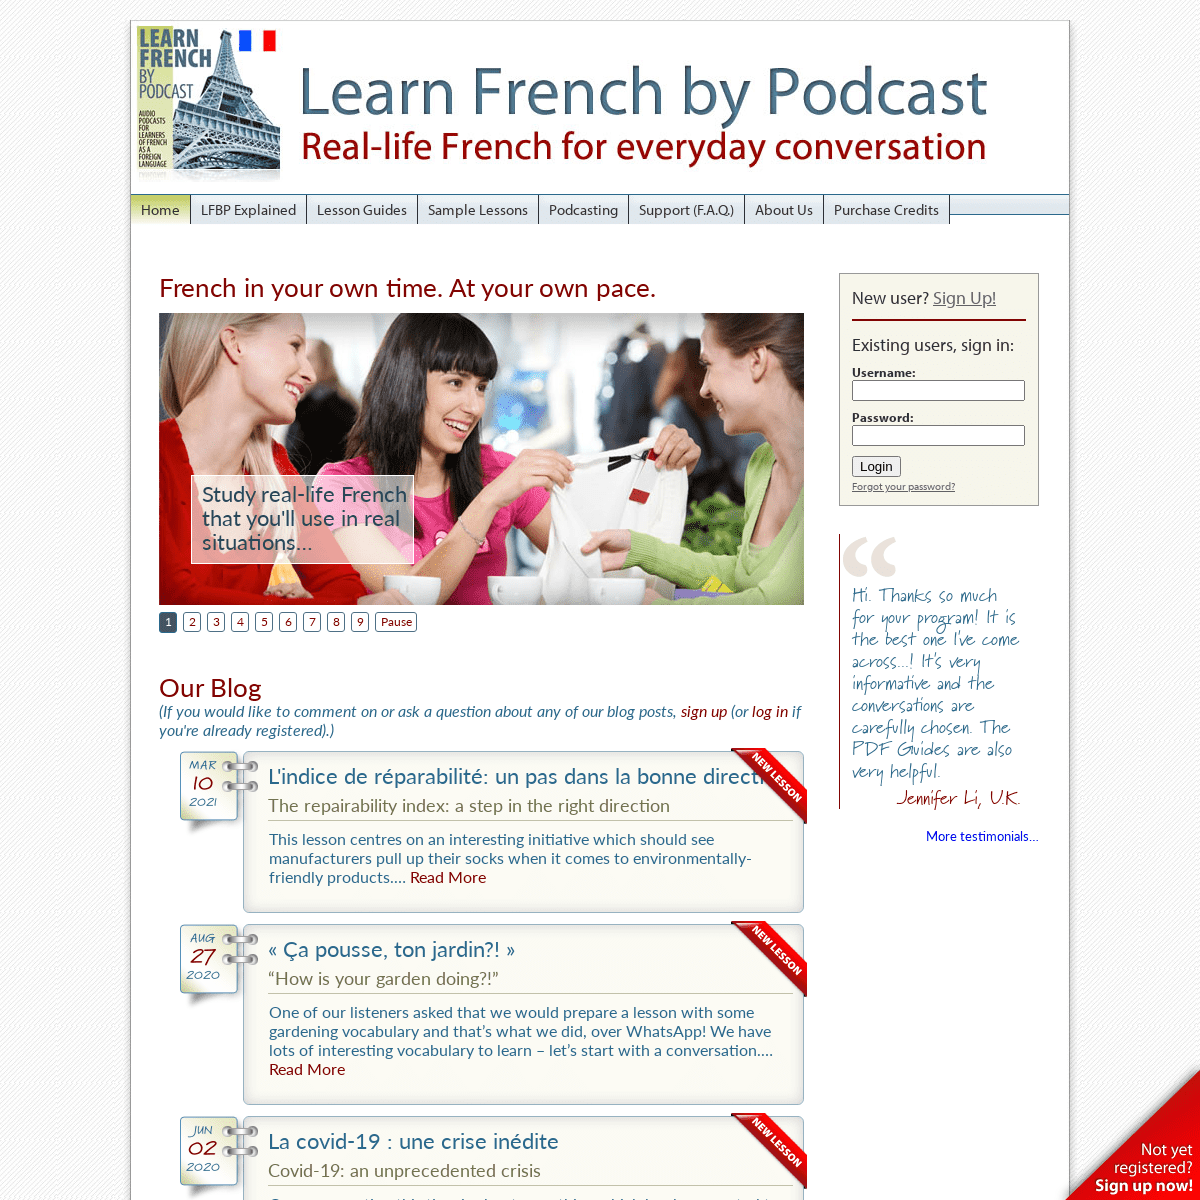 A complete backup of https://learnfrenchbypodcast.com